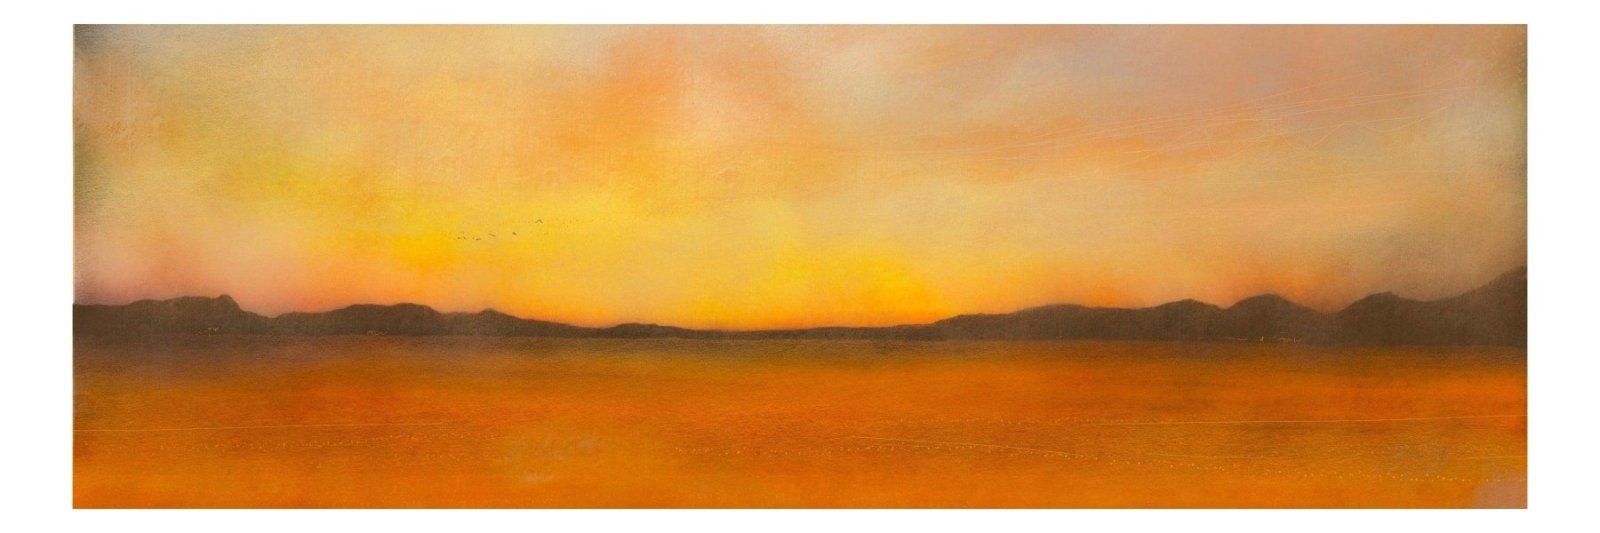 Islay Dawn-Panoramic Prints-Hebridean Islands Art Gallery-Paintings, Prints, Homeware, Art Gifts From Scotland By Scottish Artist Kevin Hunter